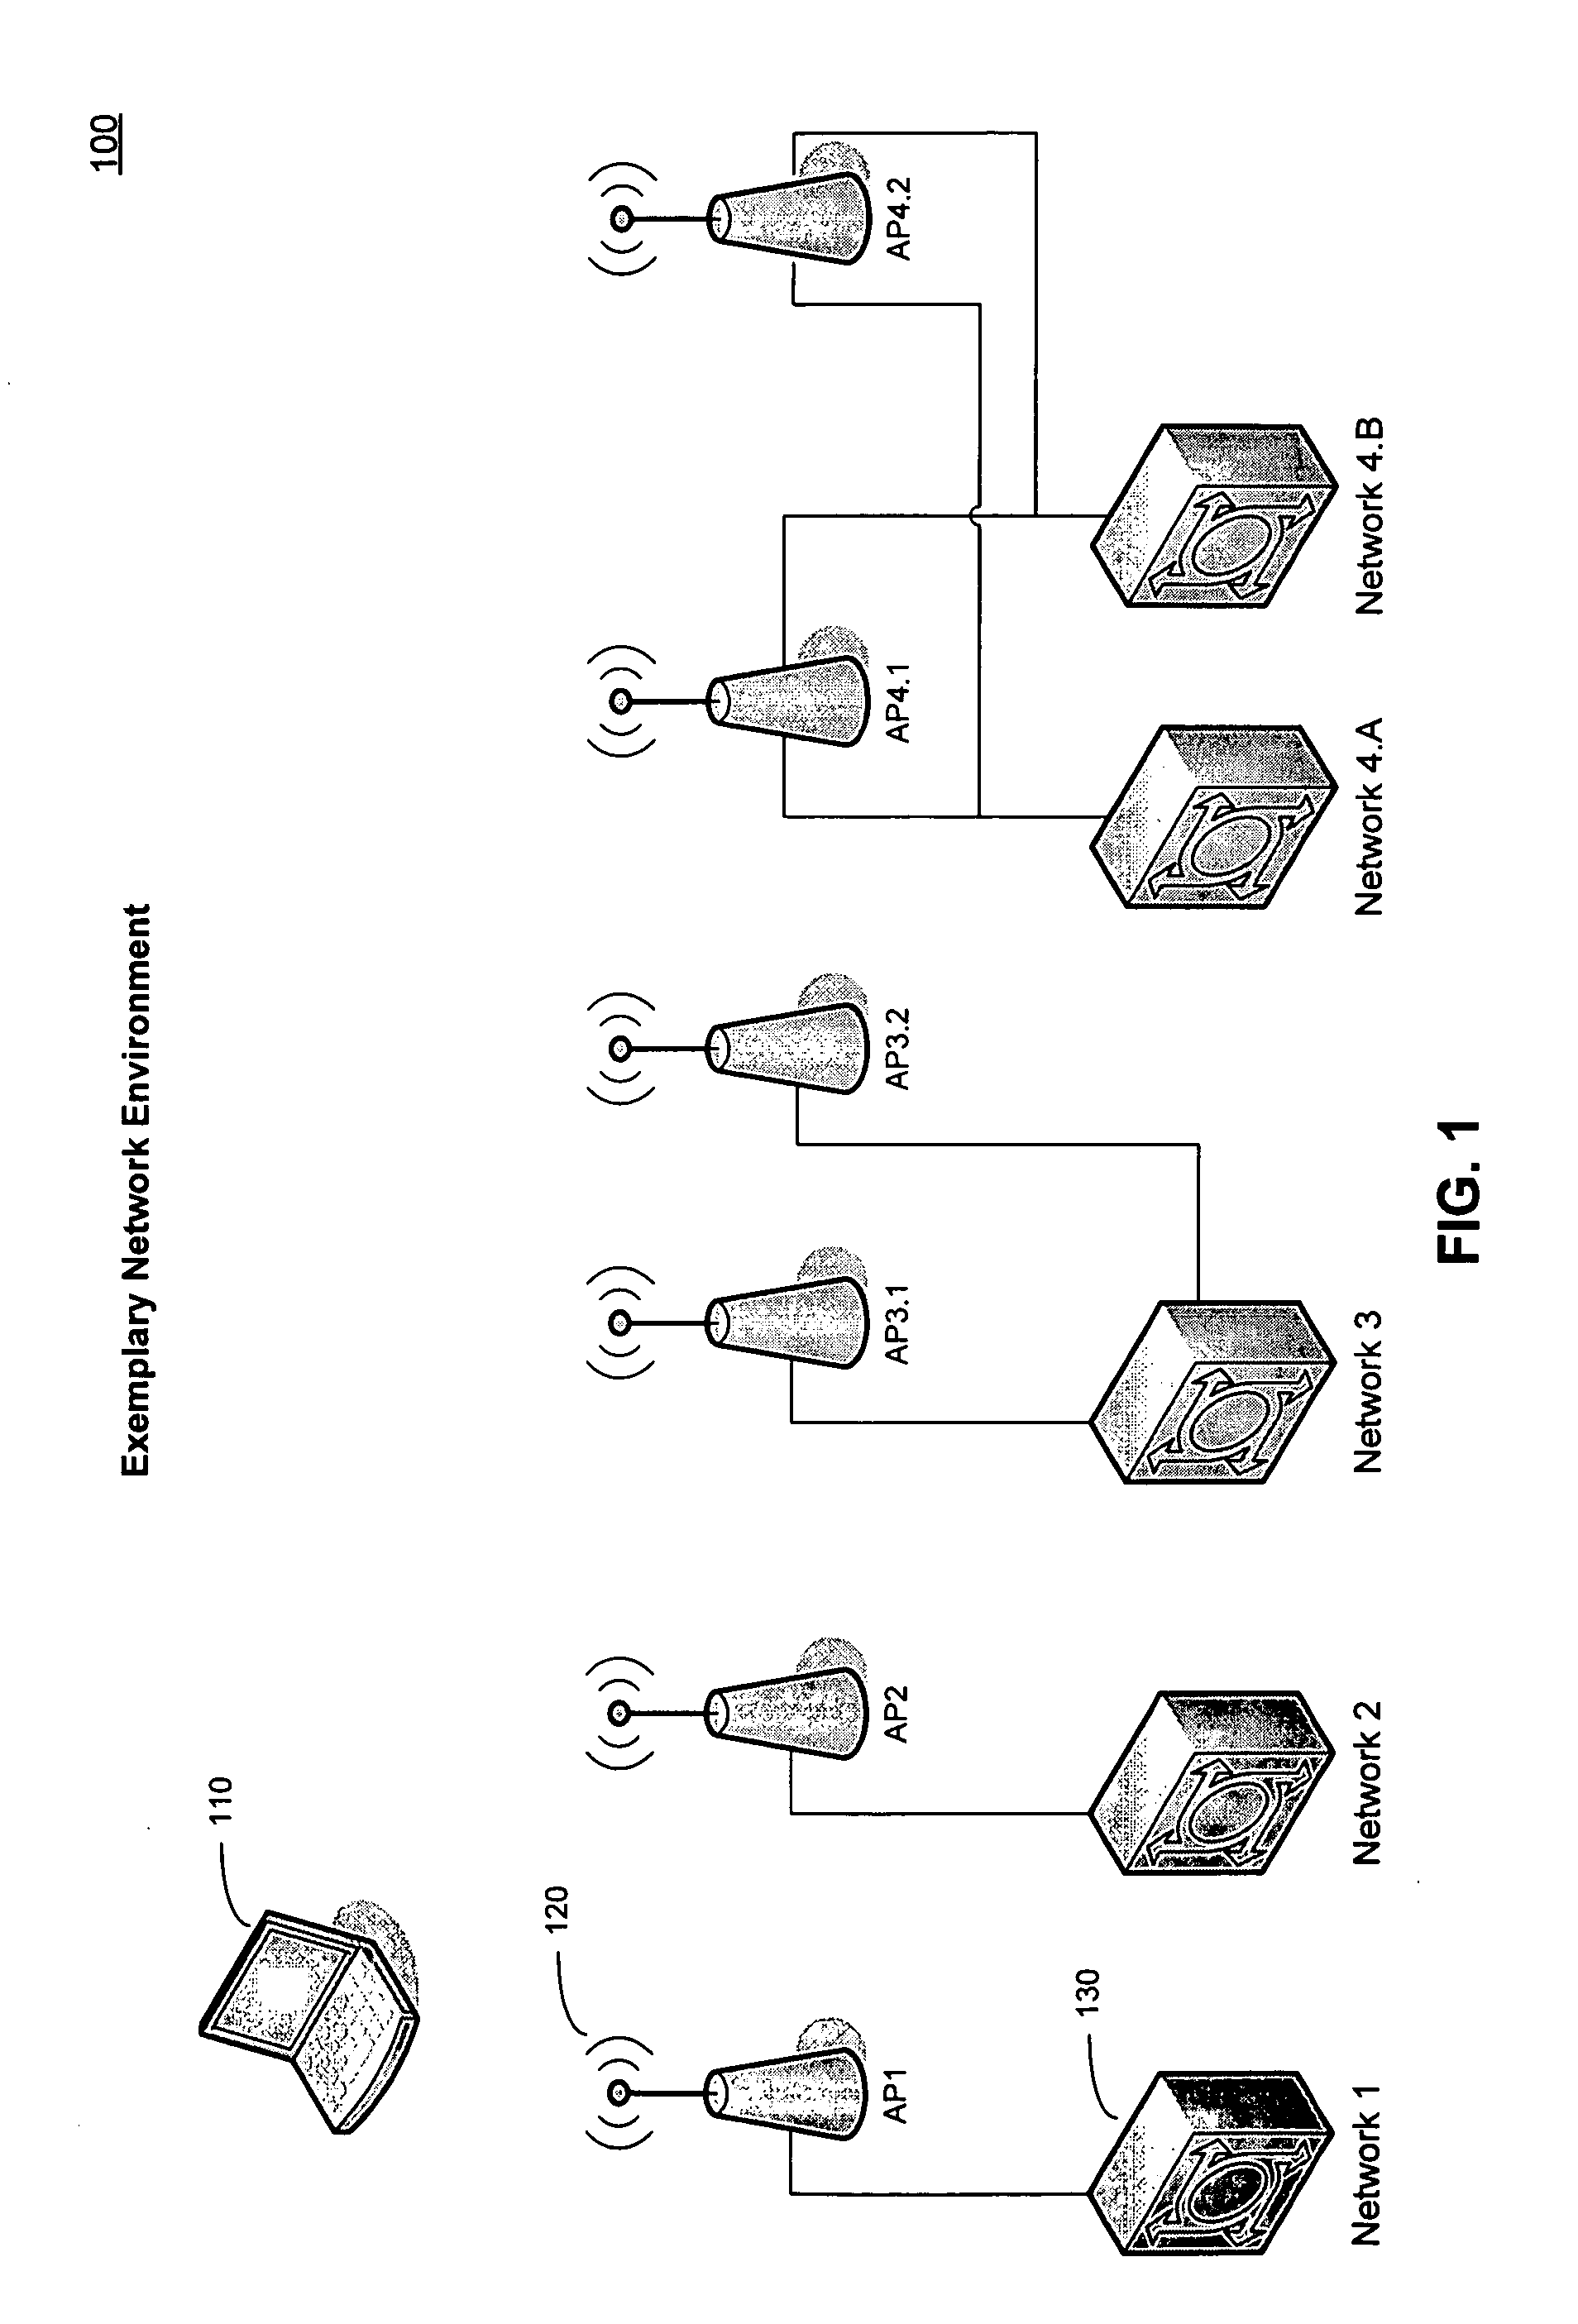 Delegated network connection management and power management in a wireless device